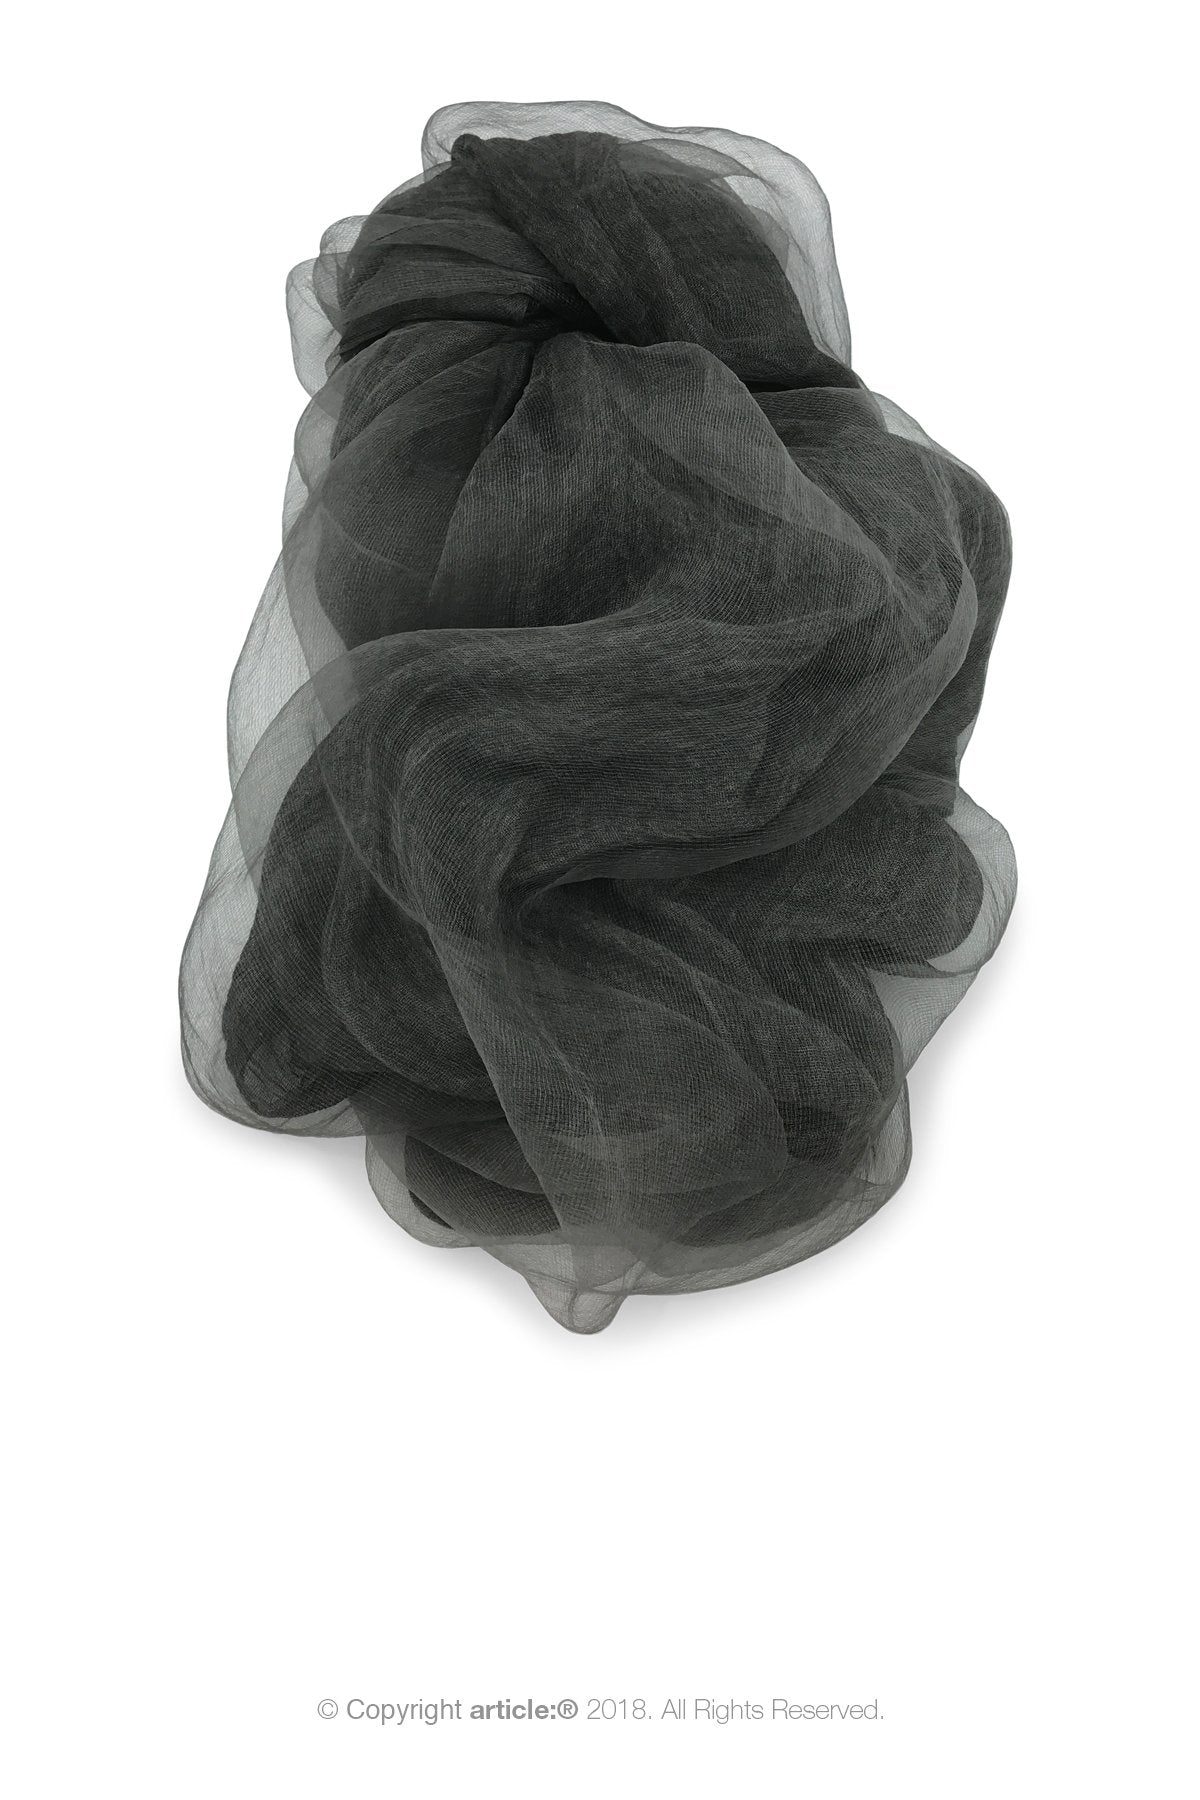 article: #900 Scarf / Wrap - Anthracite